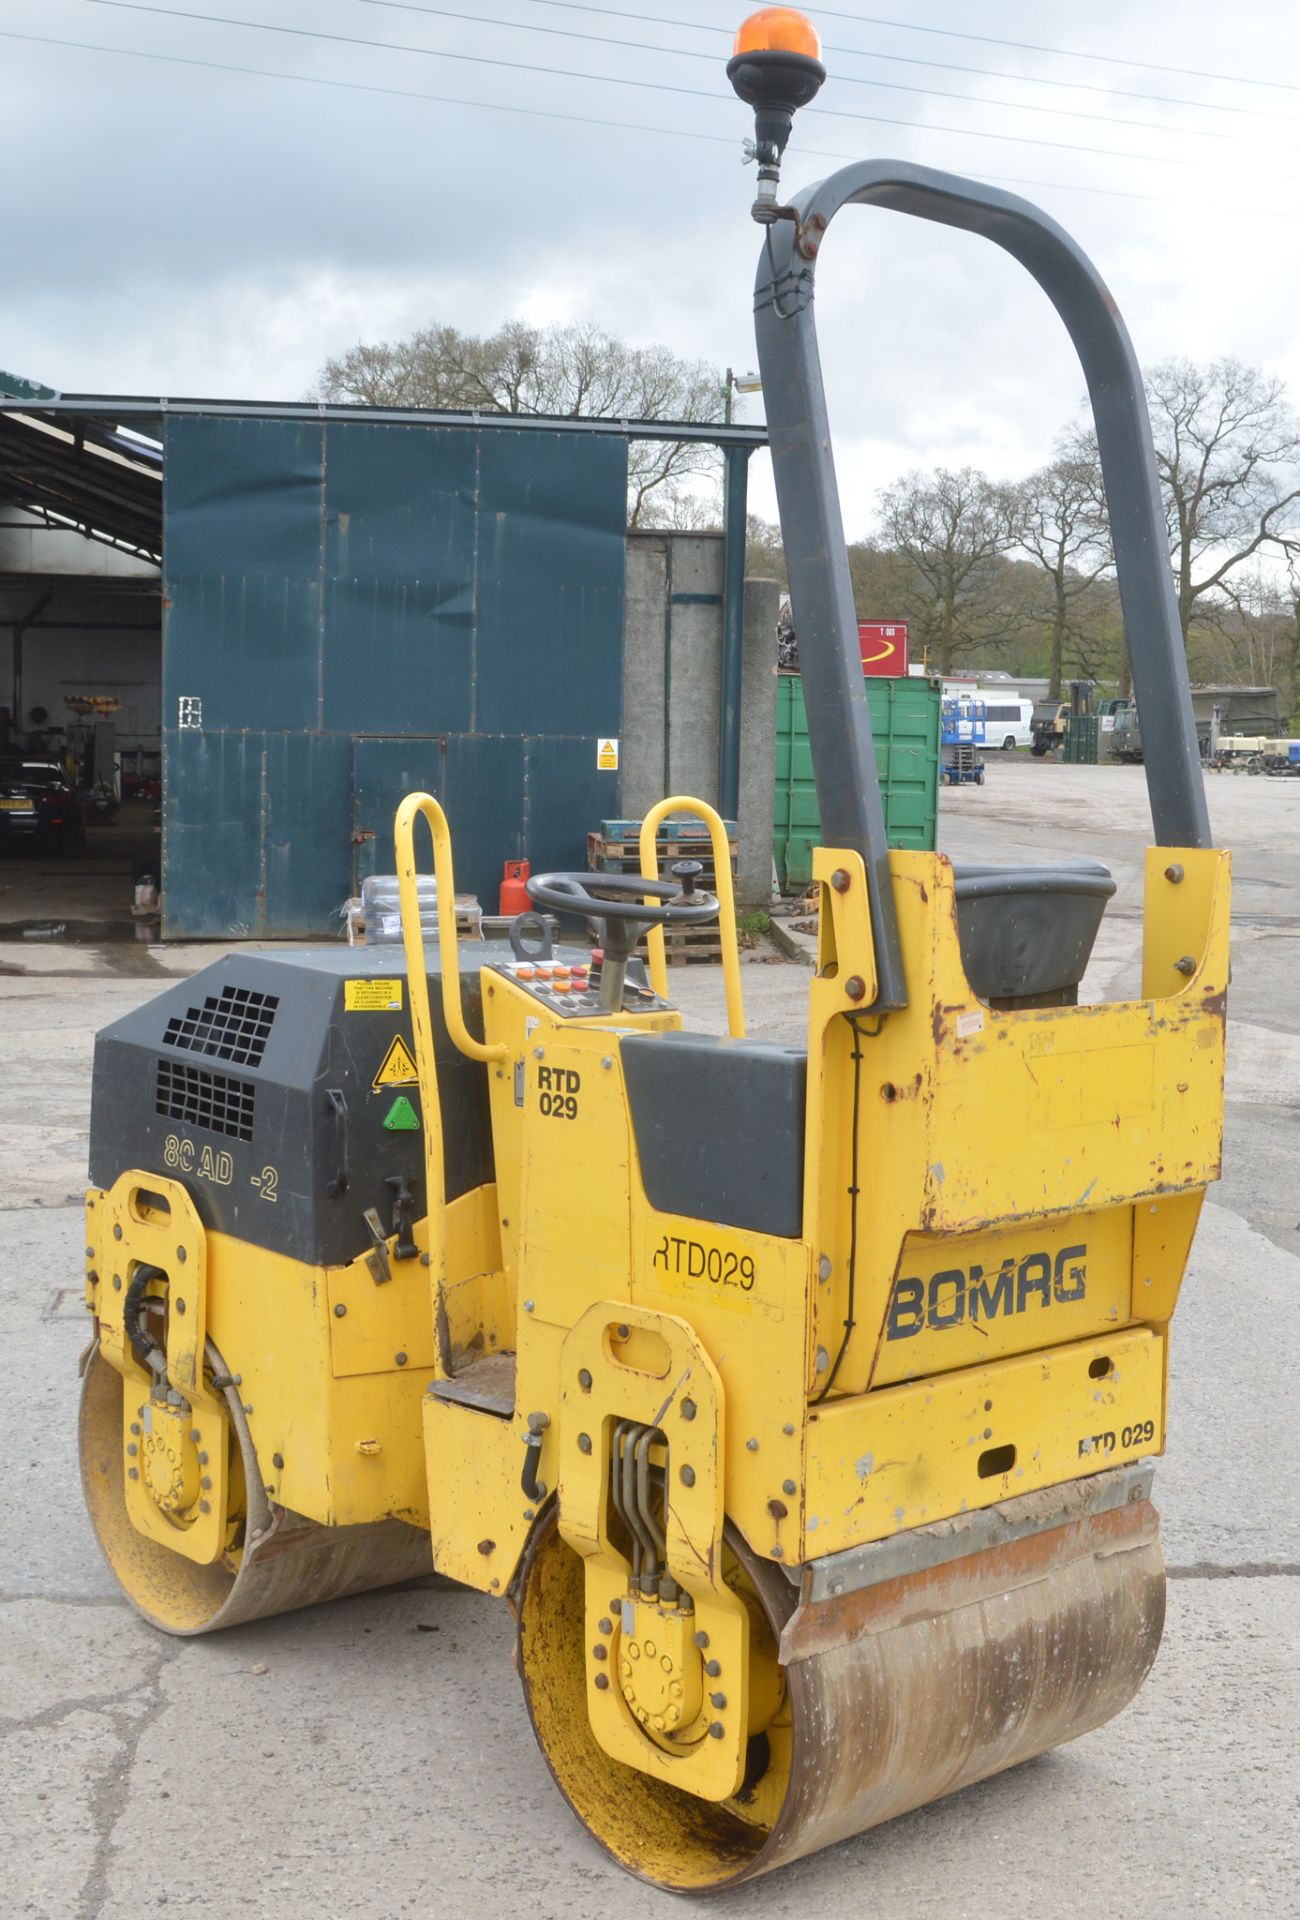 Bomag BW80AD-2 double drum ride on roller  Year: 2006 S/N: 426052 Recorded hours: 869 RTD029 - Image 4 of 7